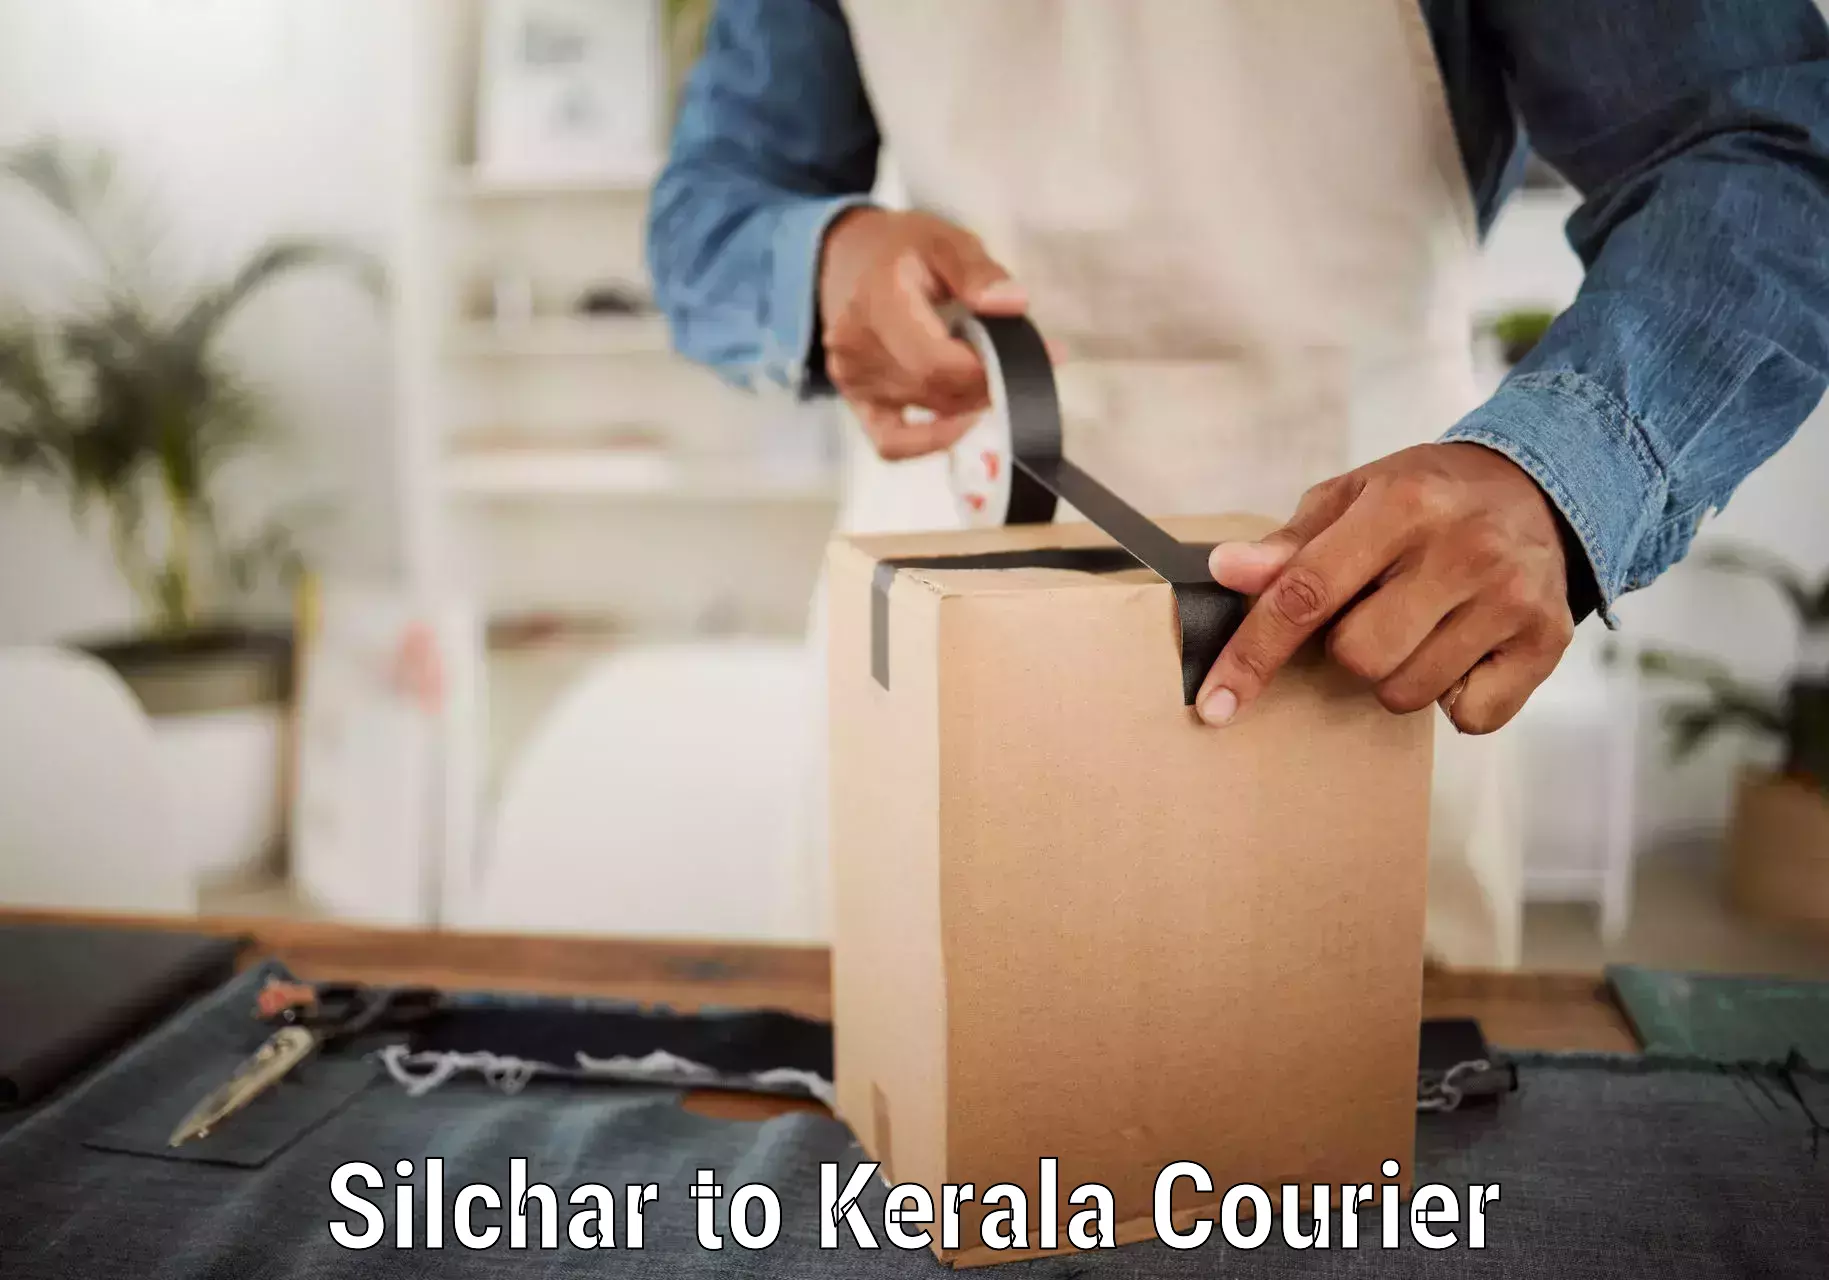 Efficient shipping platforms Silchar to Cochin University of Science and Technology